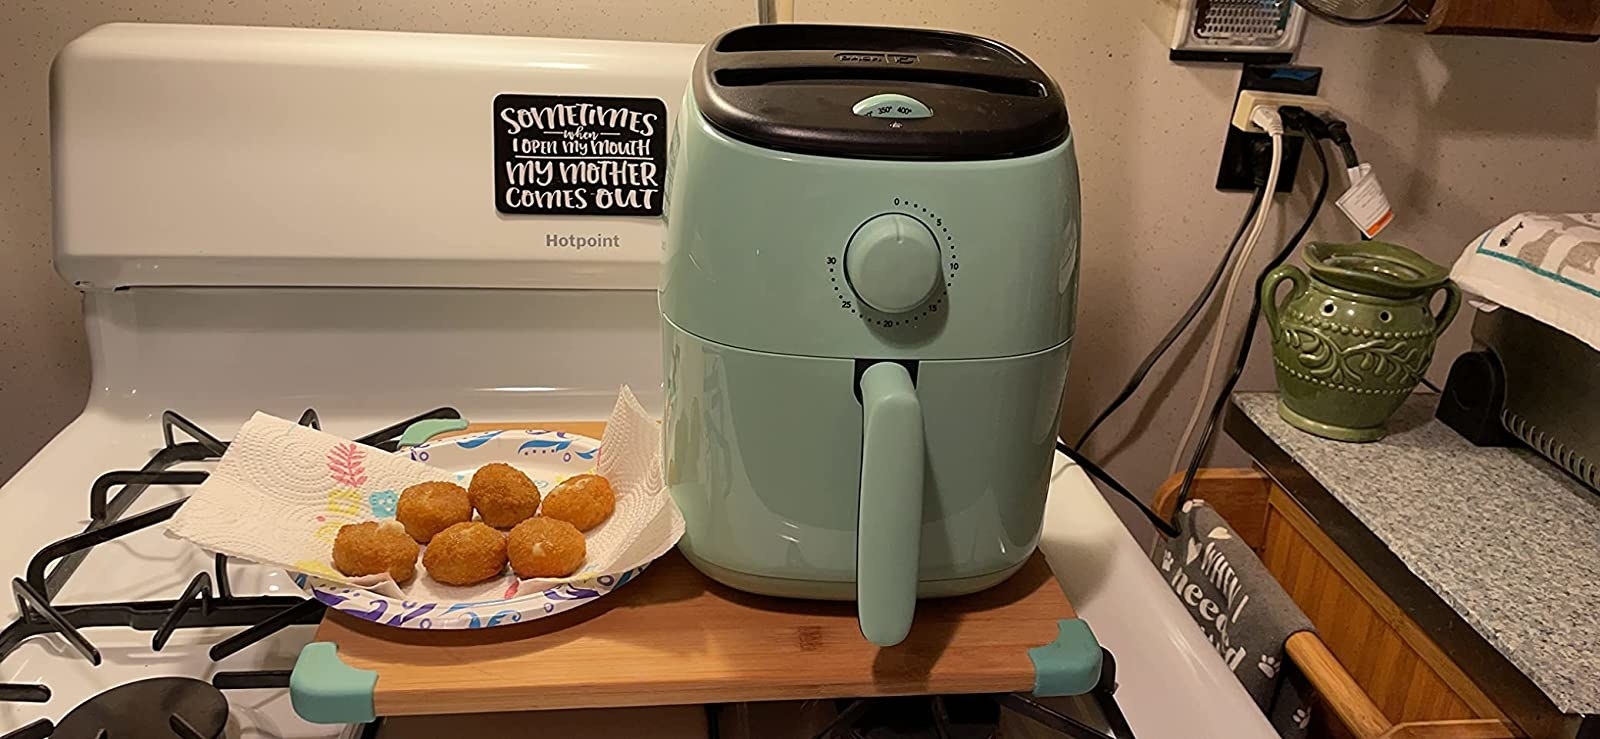 Reviewer image of blue air fryer next to a plate of air fried food